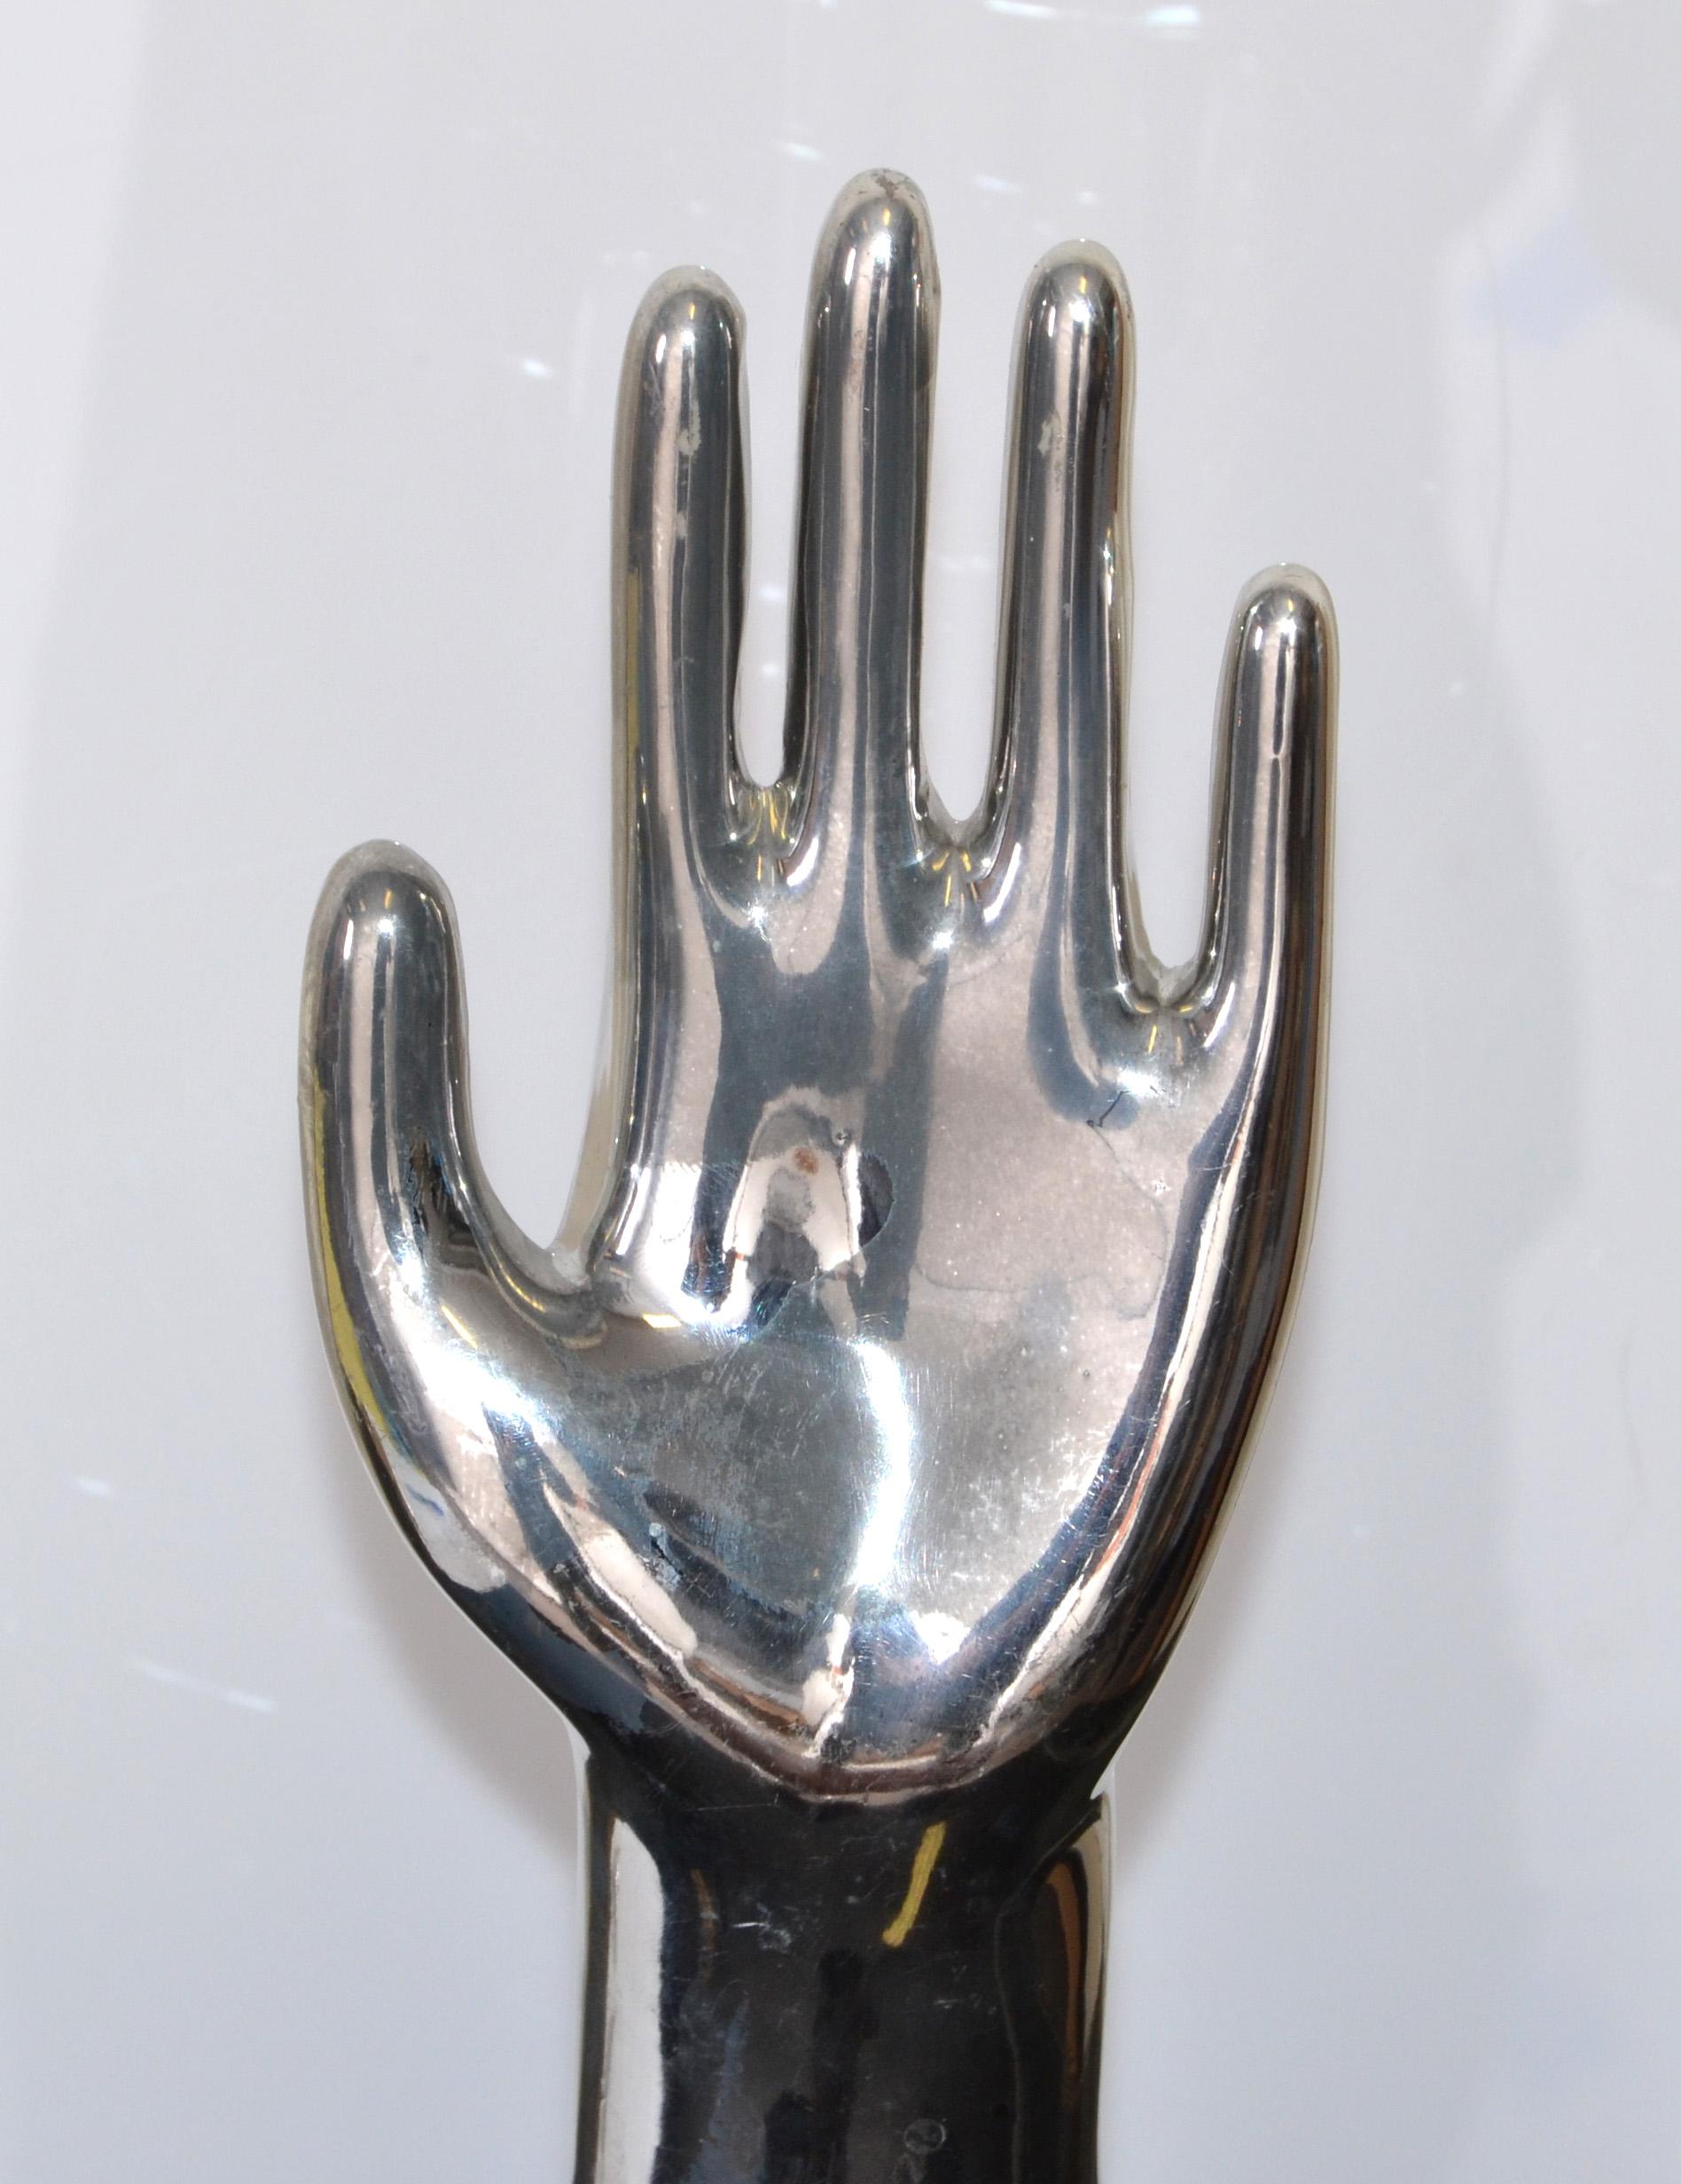 20th Century Vintage Porcelain Hand Glove Mold Nickel Plated Jewelry Stand Sculpture 1970s For Sale